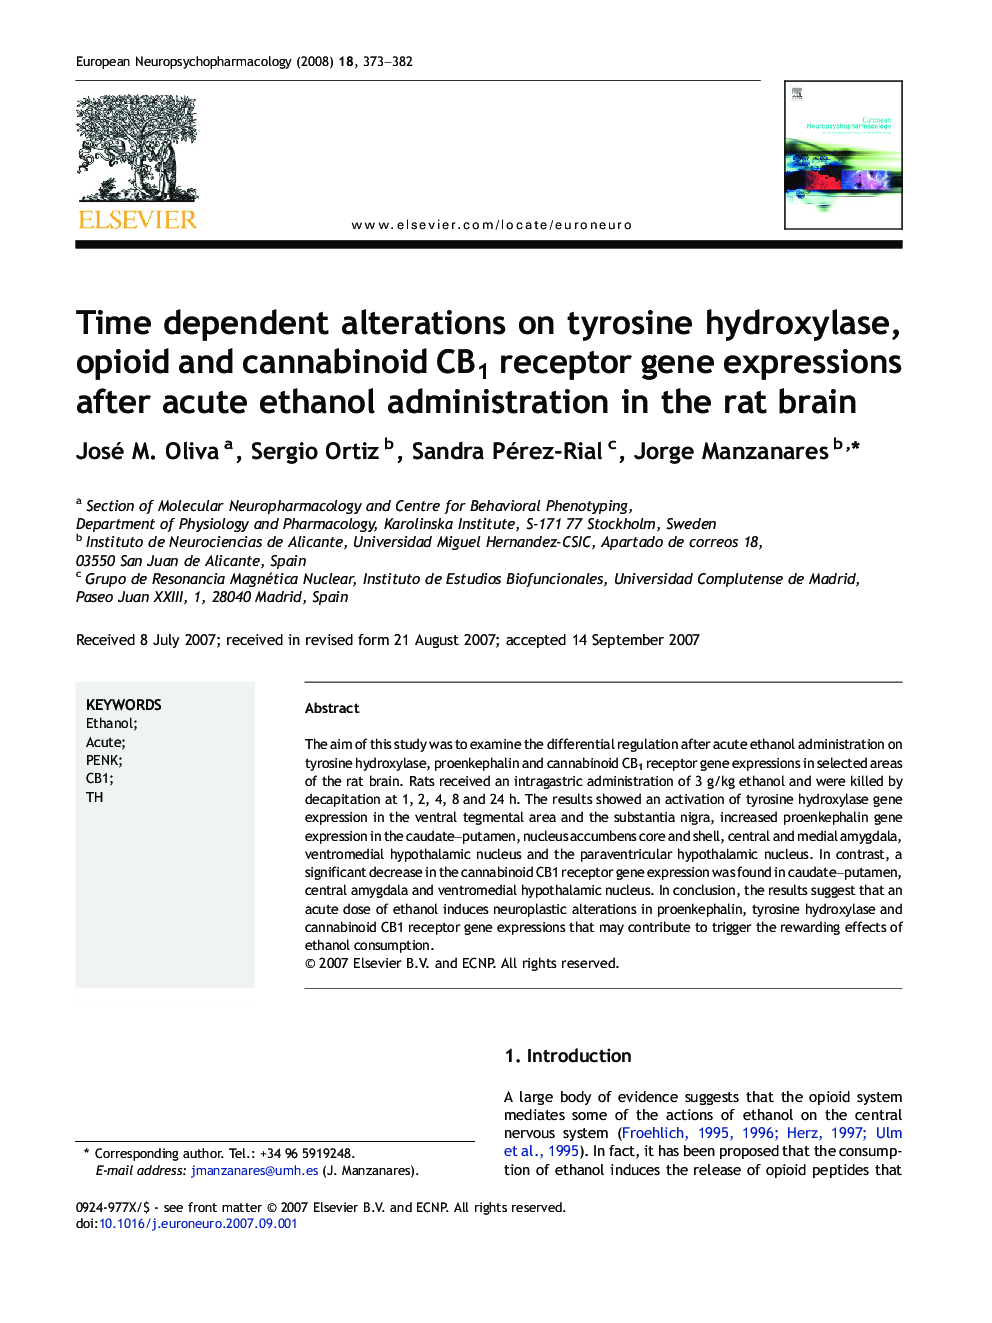 Time dependent alterations on tyrosine hydroxylase, opioid and cannabinoid CB1 receptor gene expressions after acute ethanol administration in the rat brain